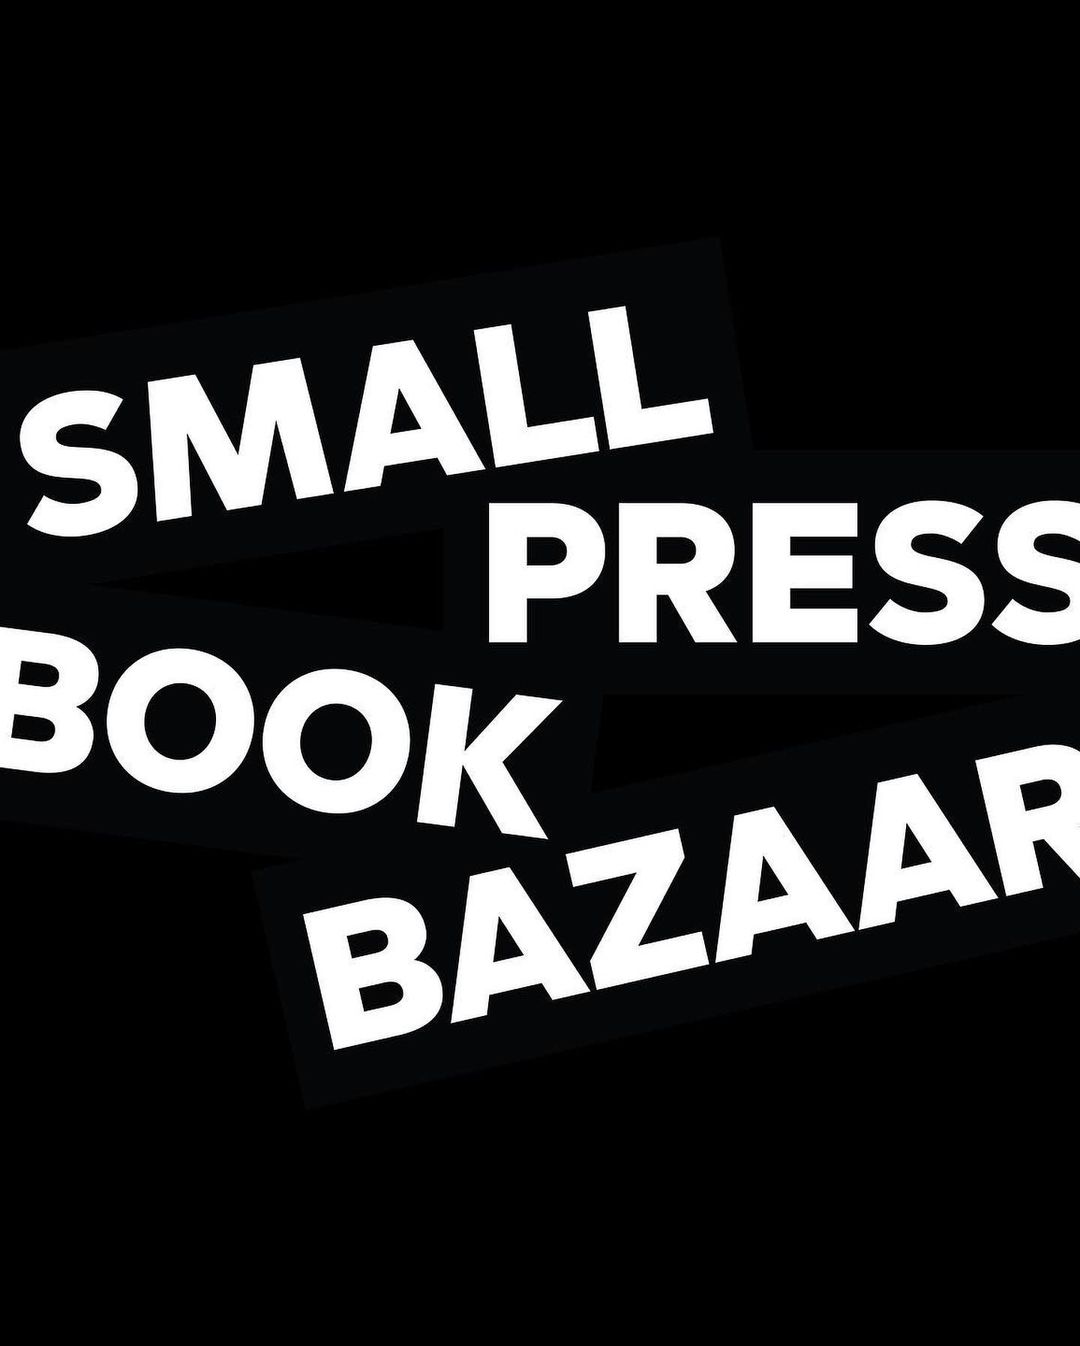 four words in all caps sans serif white font on black background, each tilted at a different angle, reads "small press book bazaar"